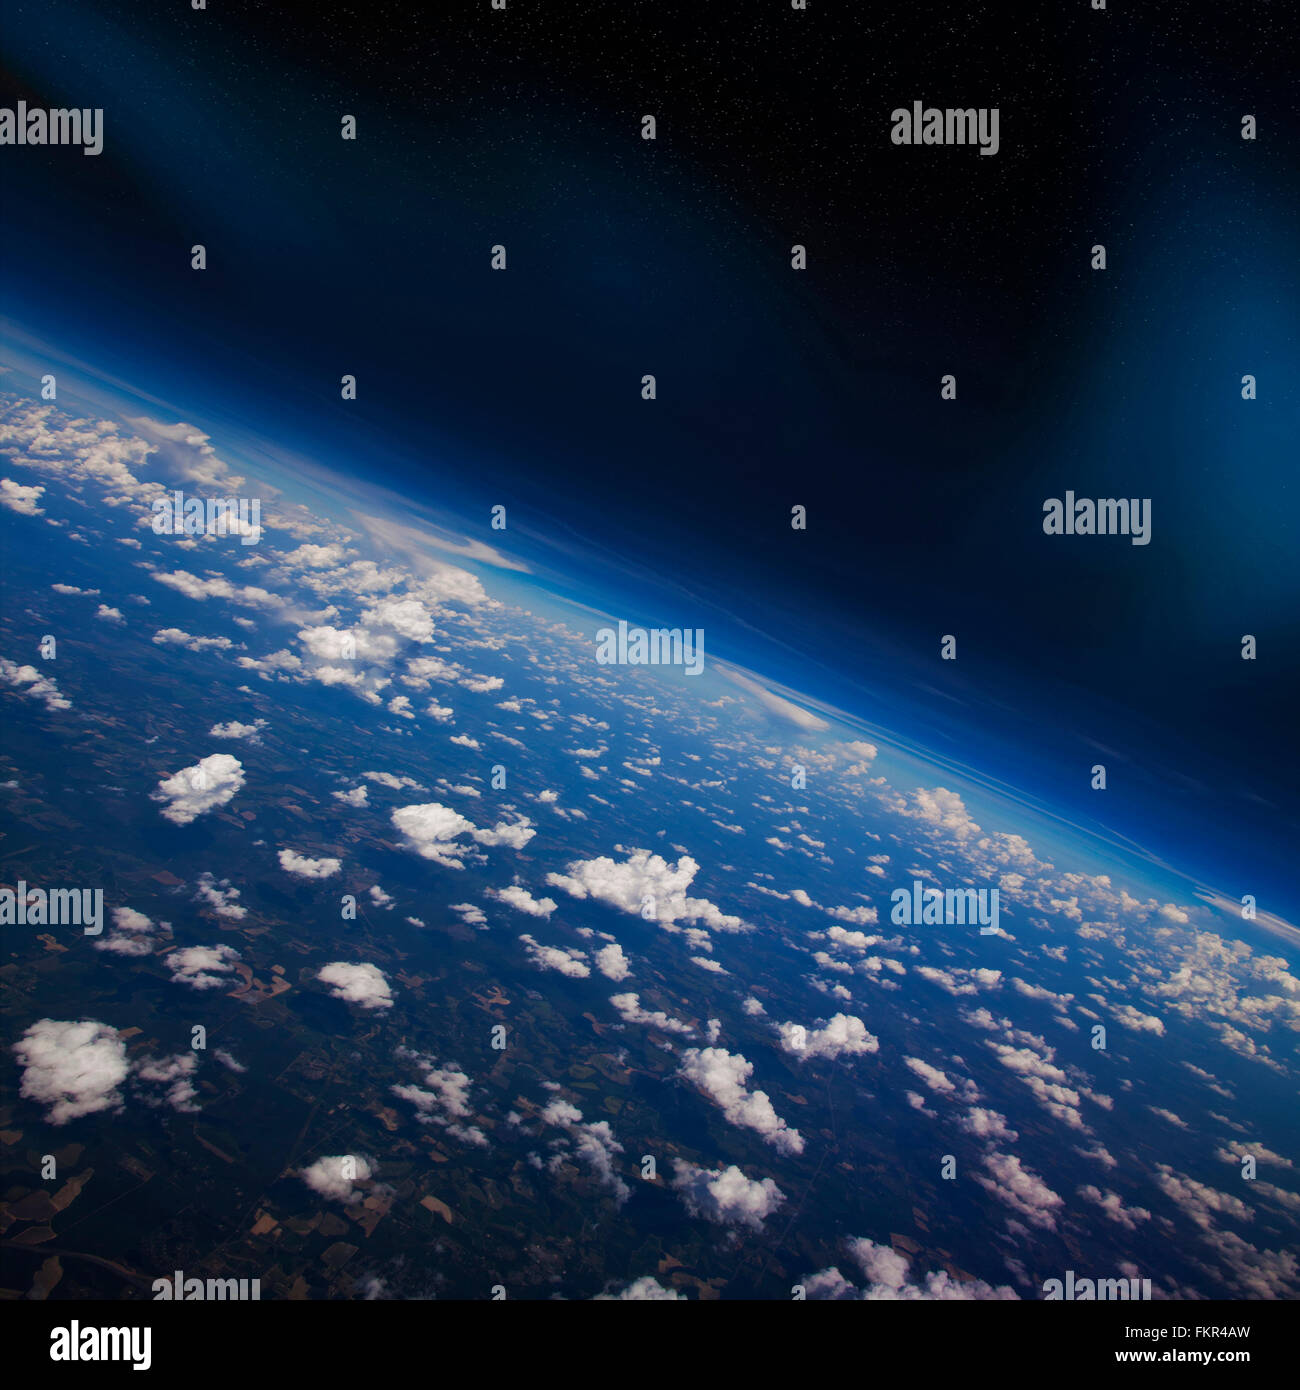 Earth atmosphere viewed from space Stock Photo